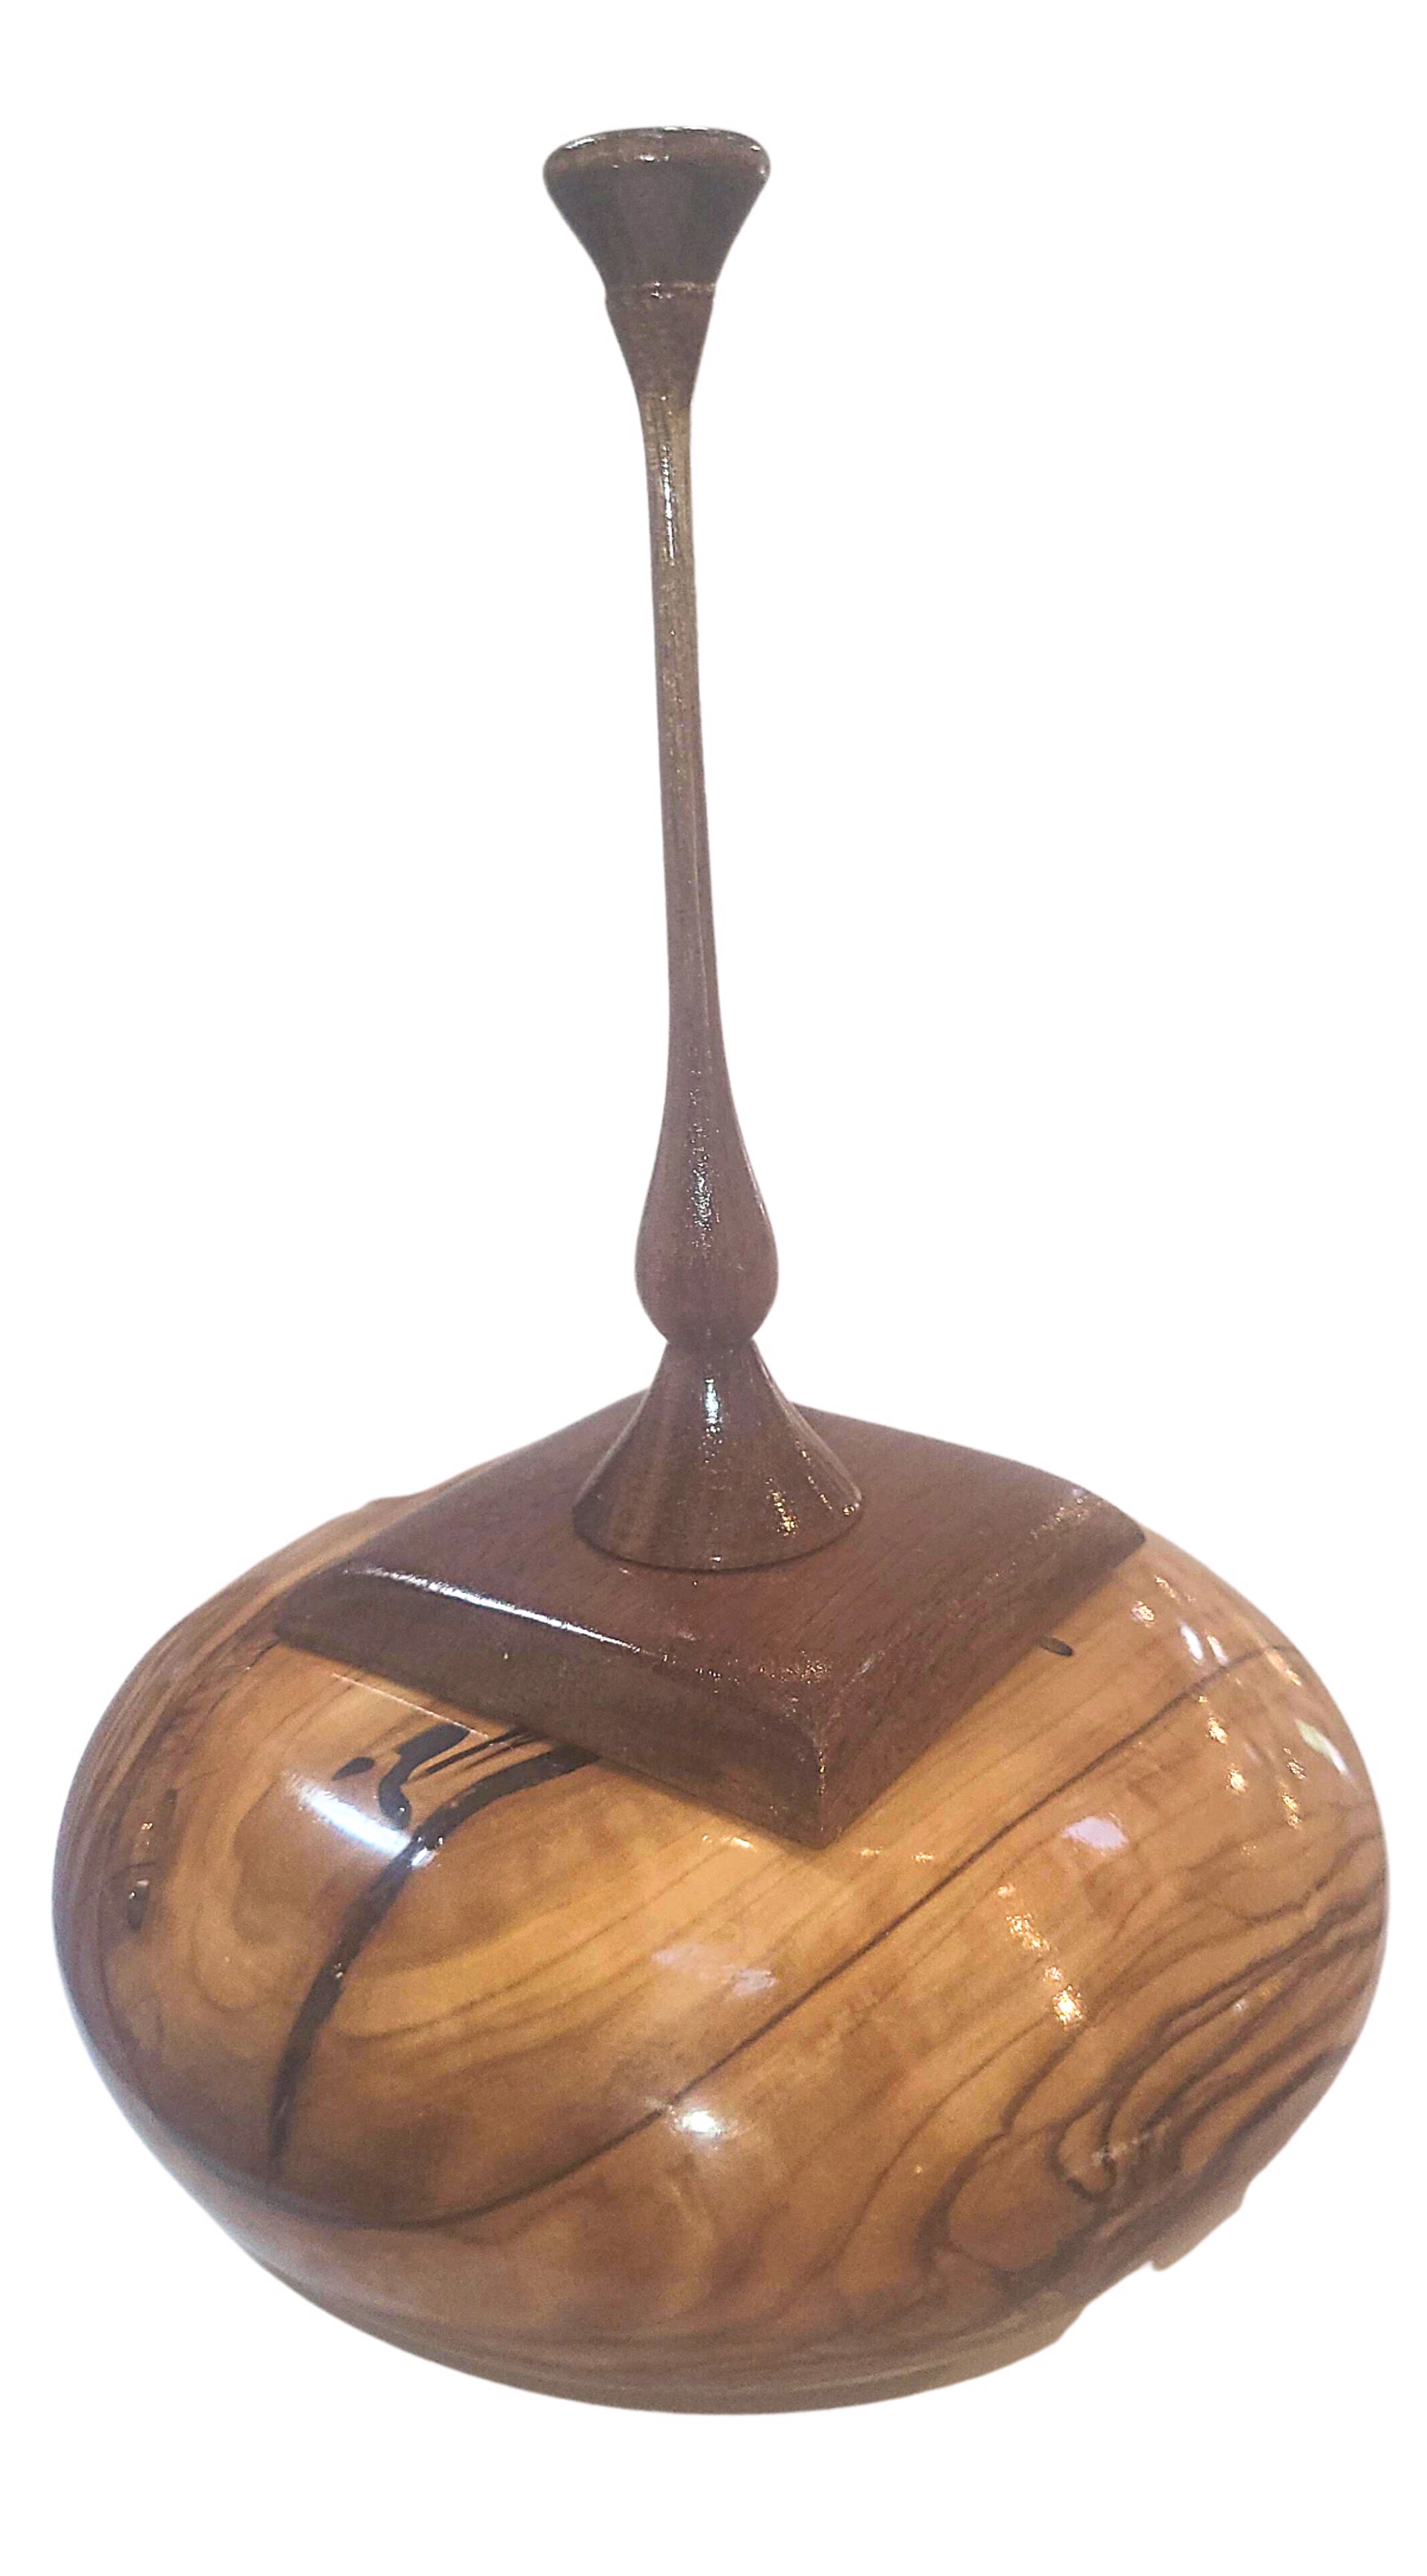 Spalted Maple hollw form with Walnut Finial 8" by Jim Scott